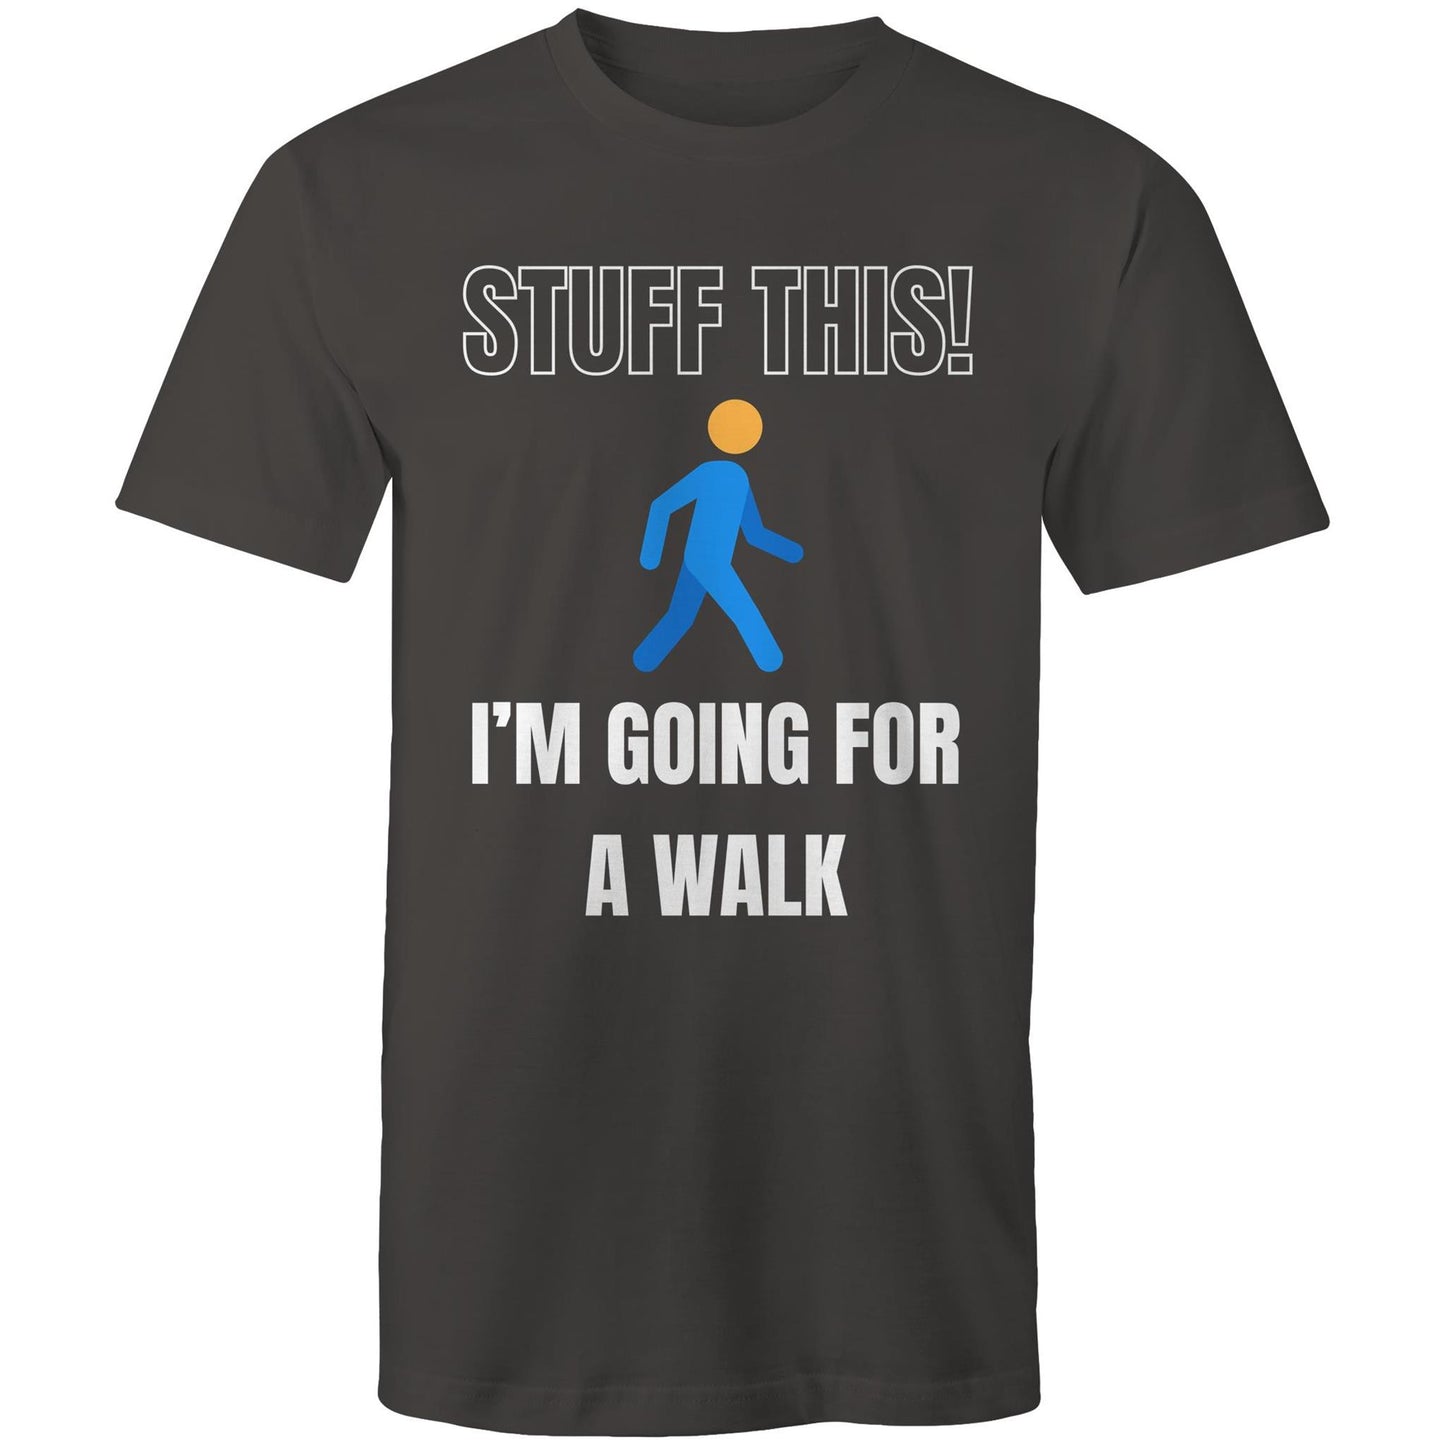 Stuff This! I'm Going For a Walk - Mens T-Shirt